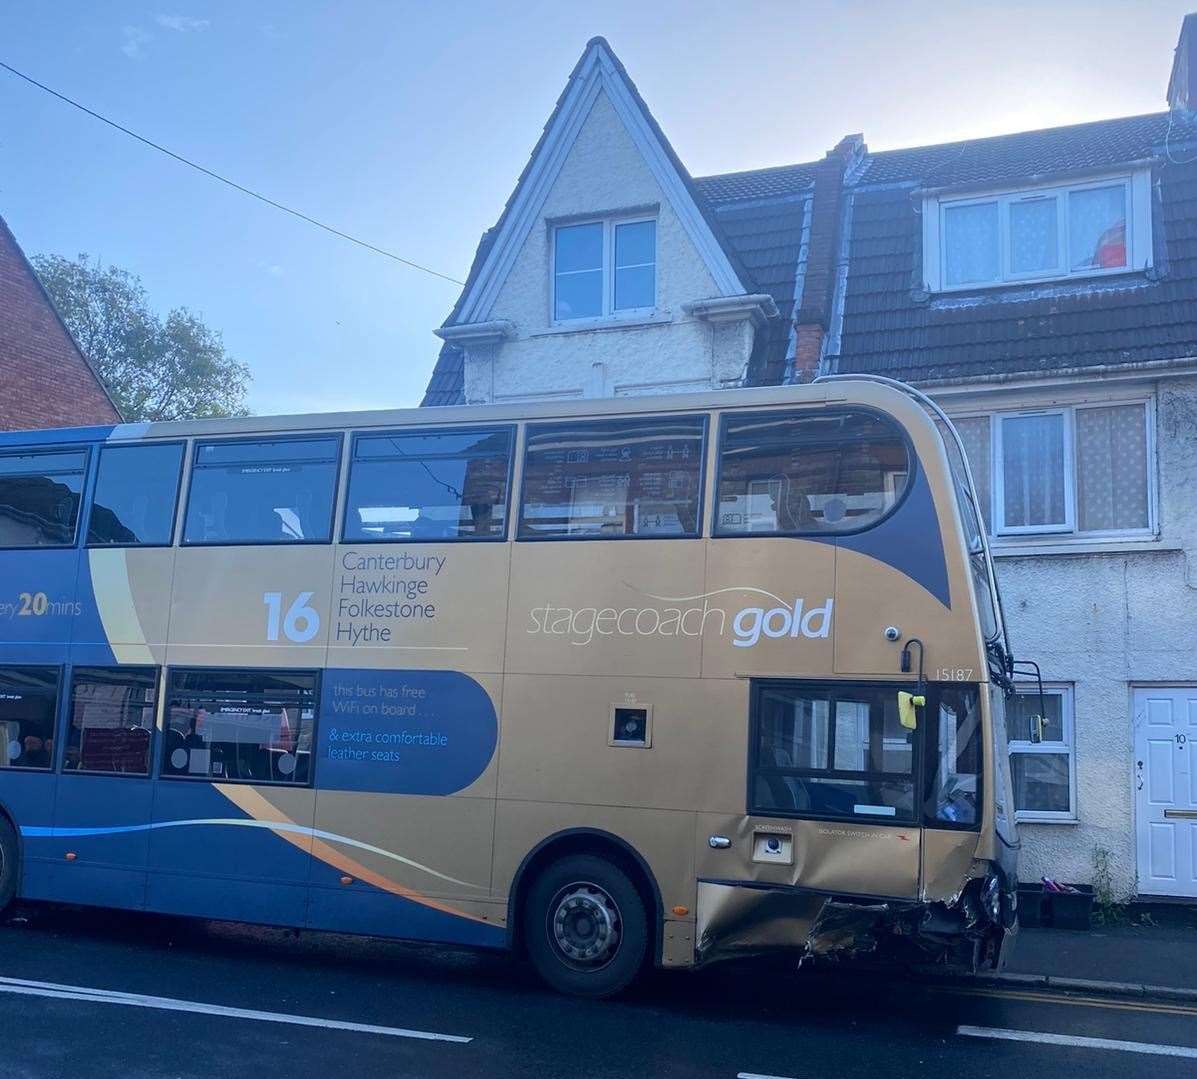 A Stagecoach bus was involved in the accident Picture: James Hornsey